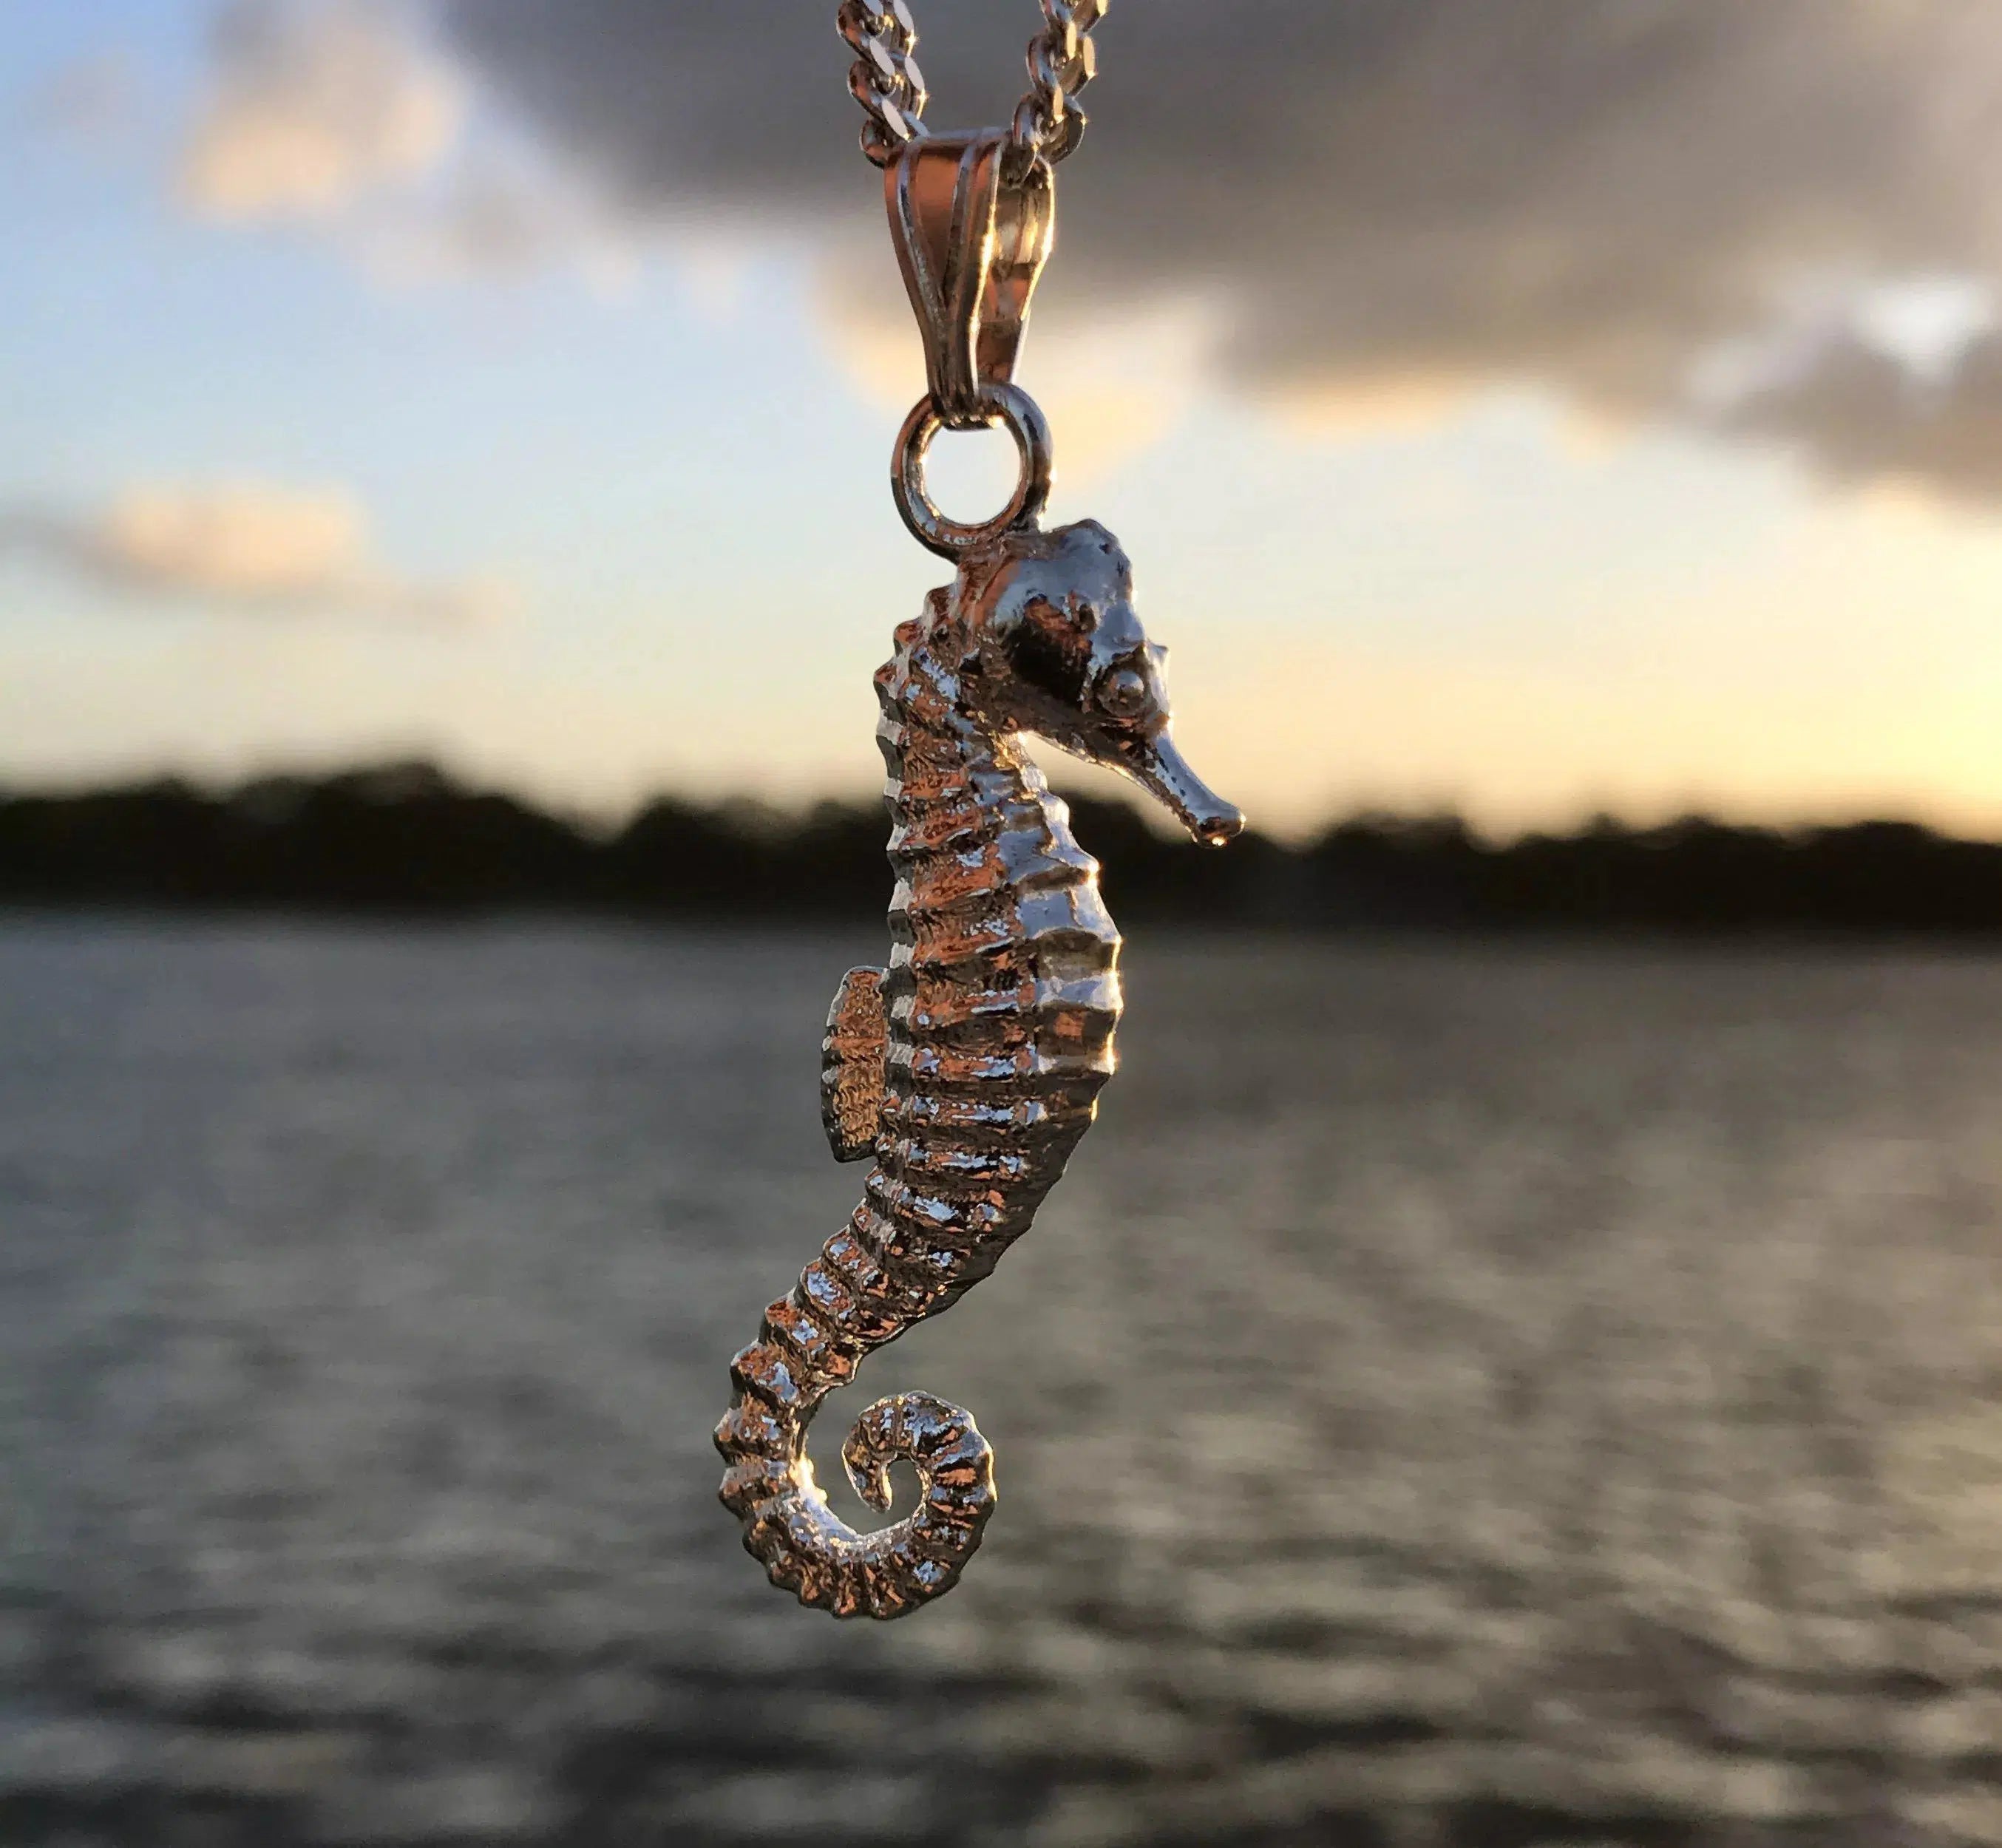 Seahorse Necklace : Meaning and Symbolism